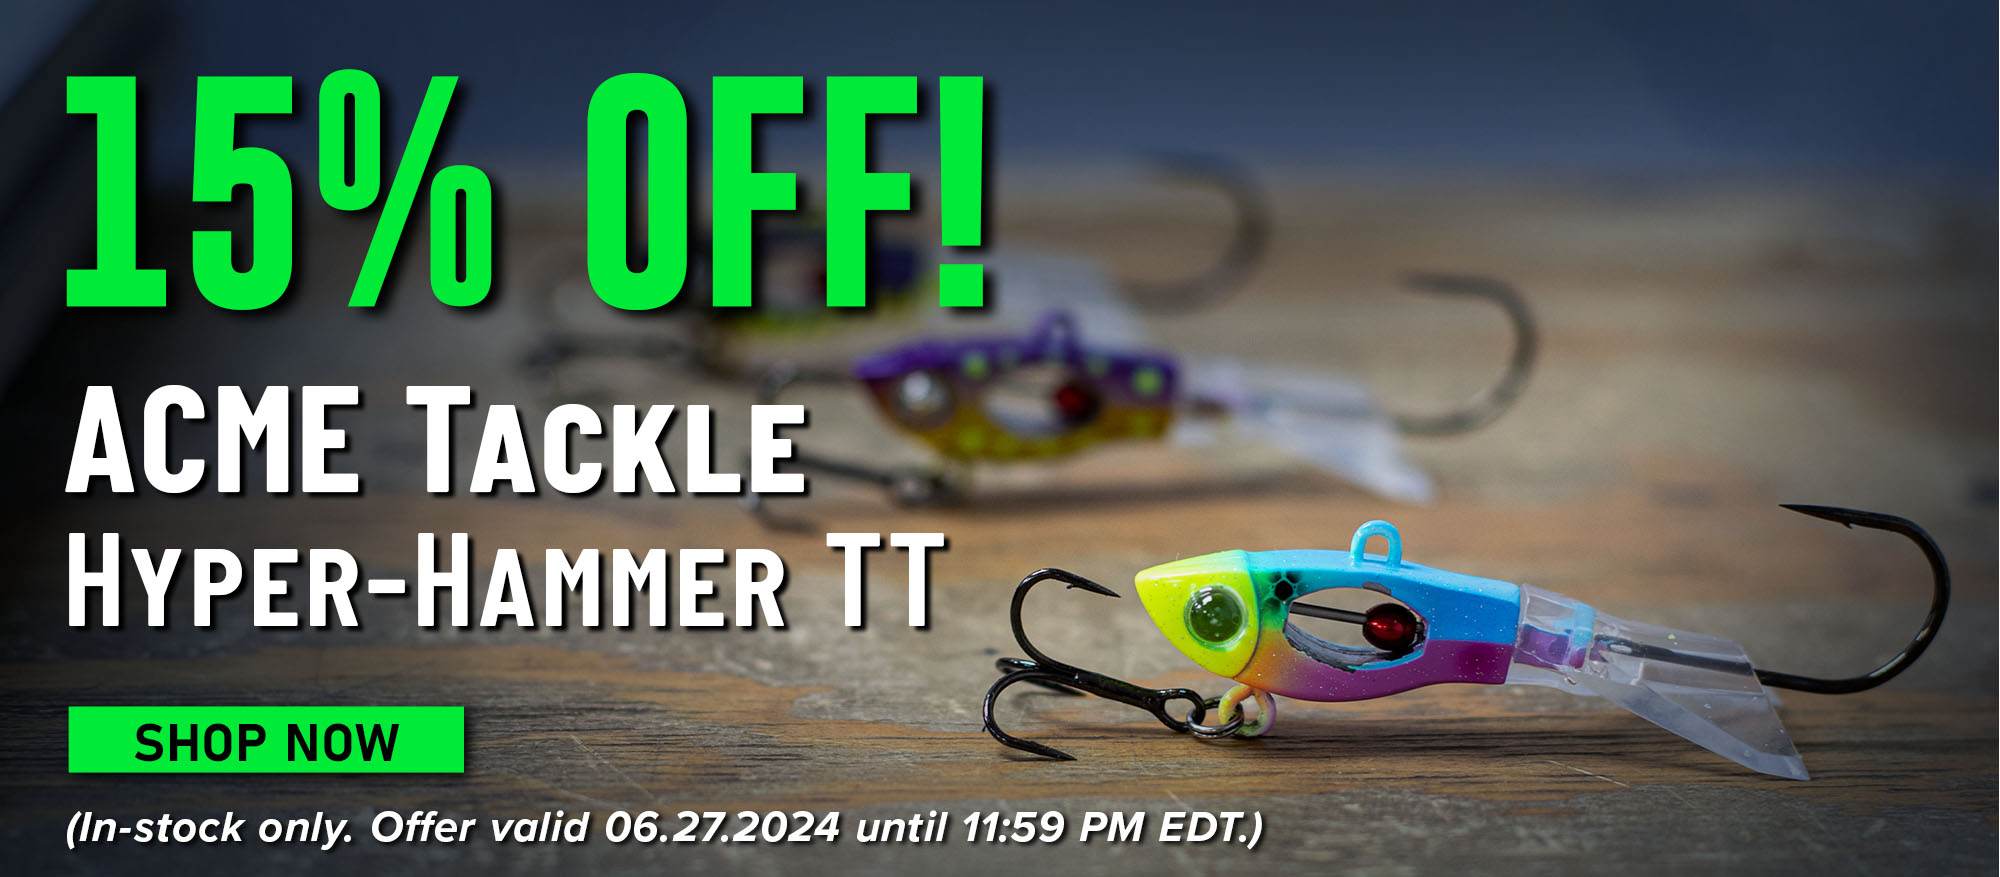 15% Off! ACME Tackle Hyper-Hammer TT Shop Now (In-stock only. Offer valid 06.27.2024 until 11:59 PM EDT.)